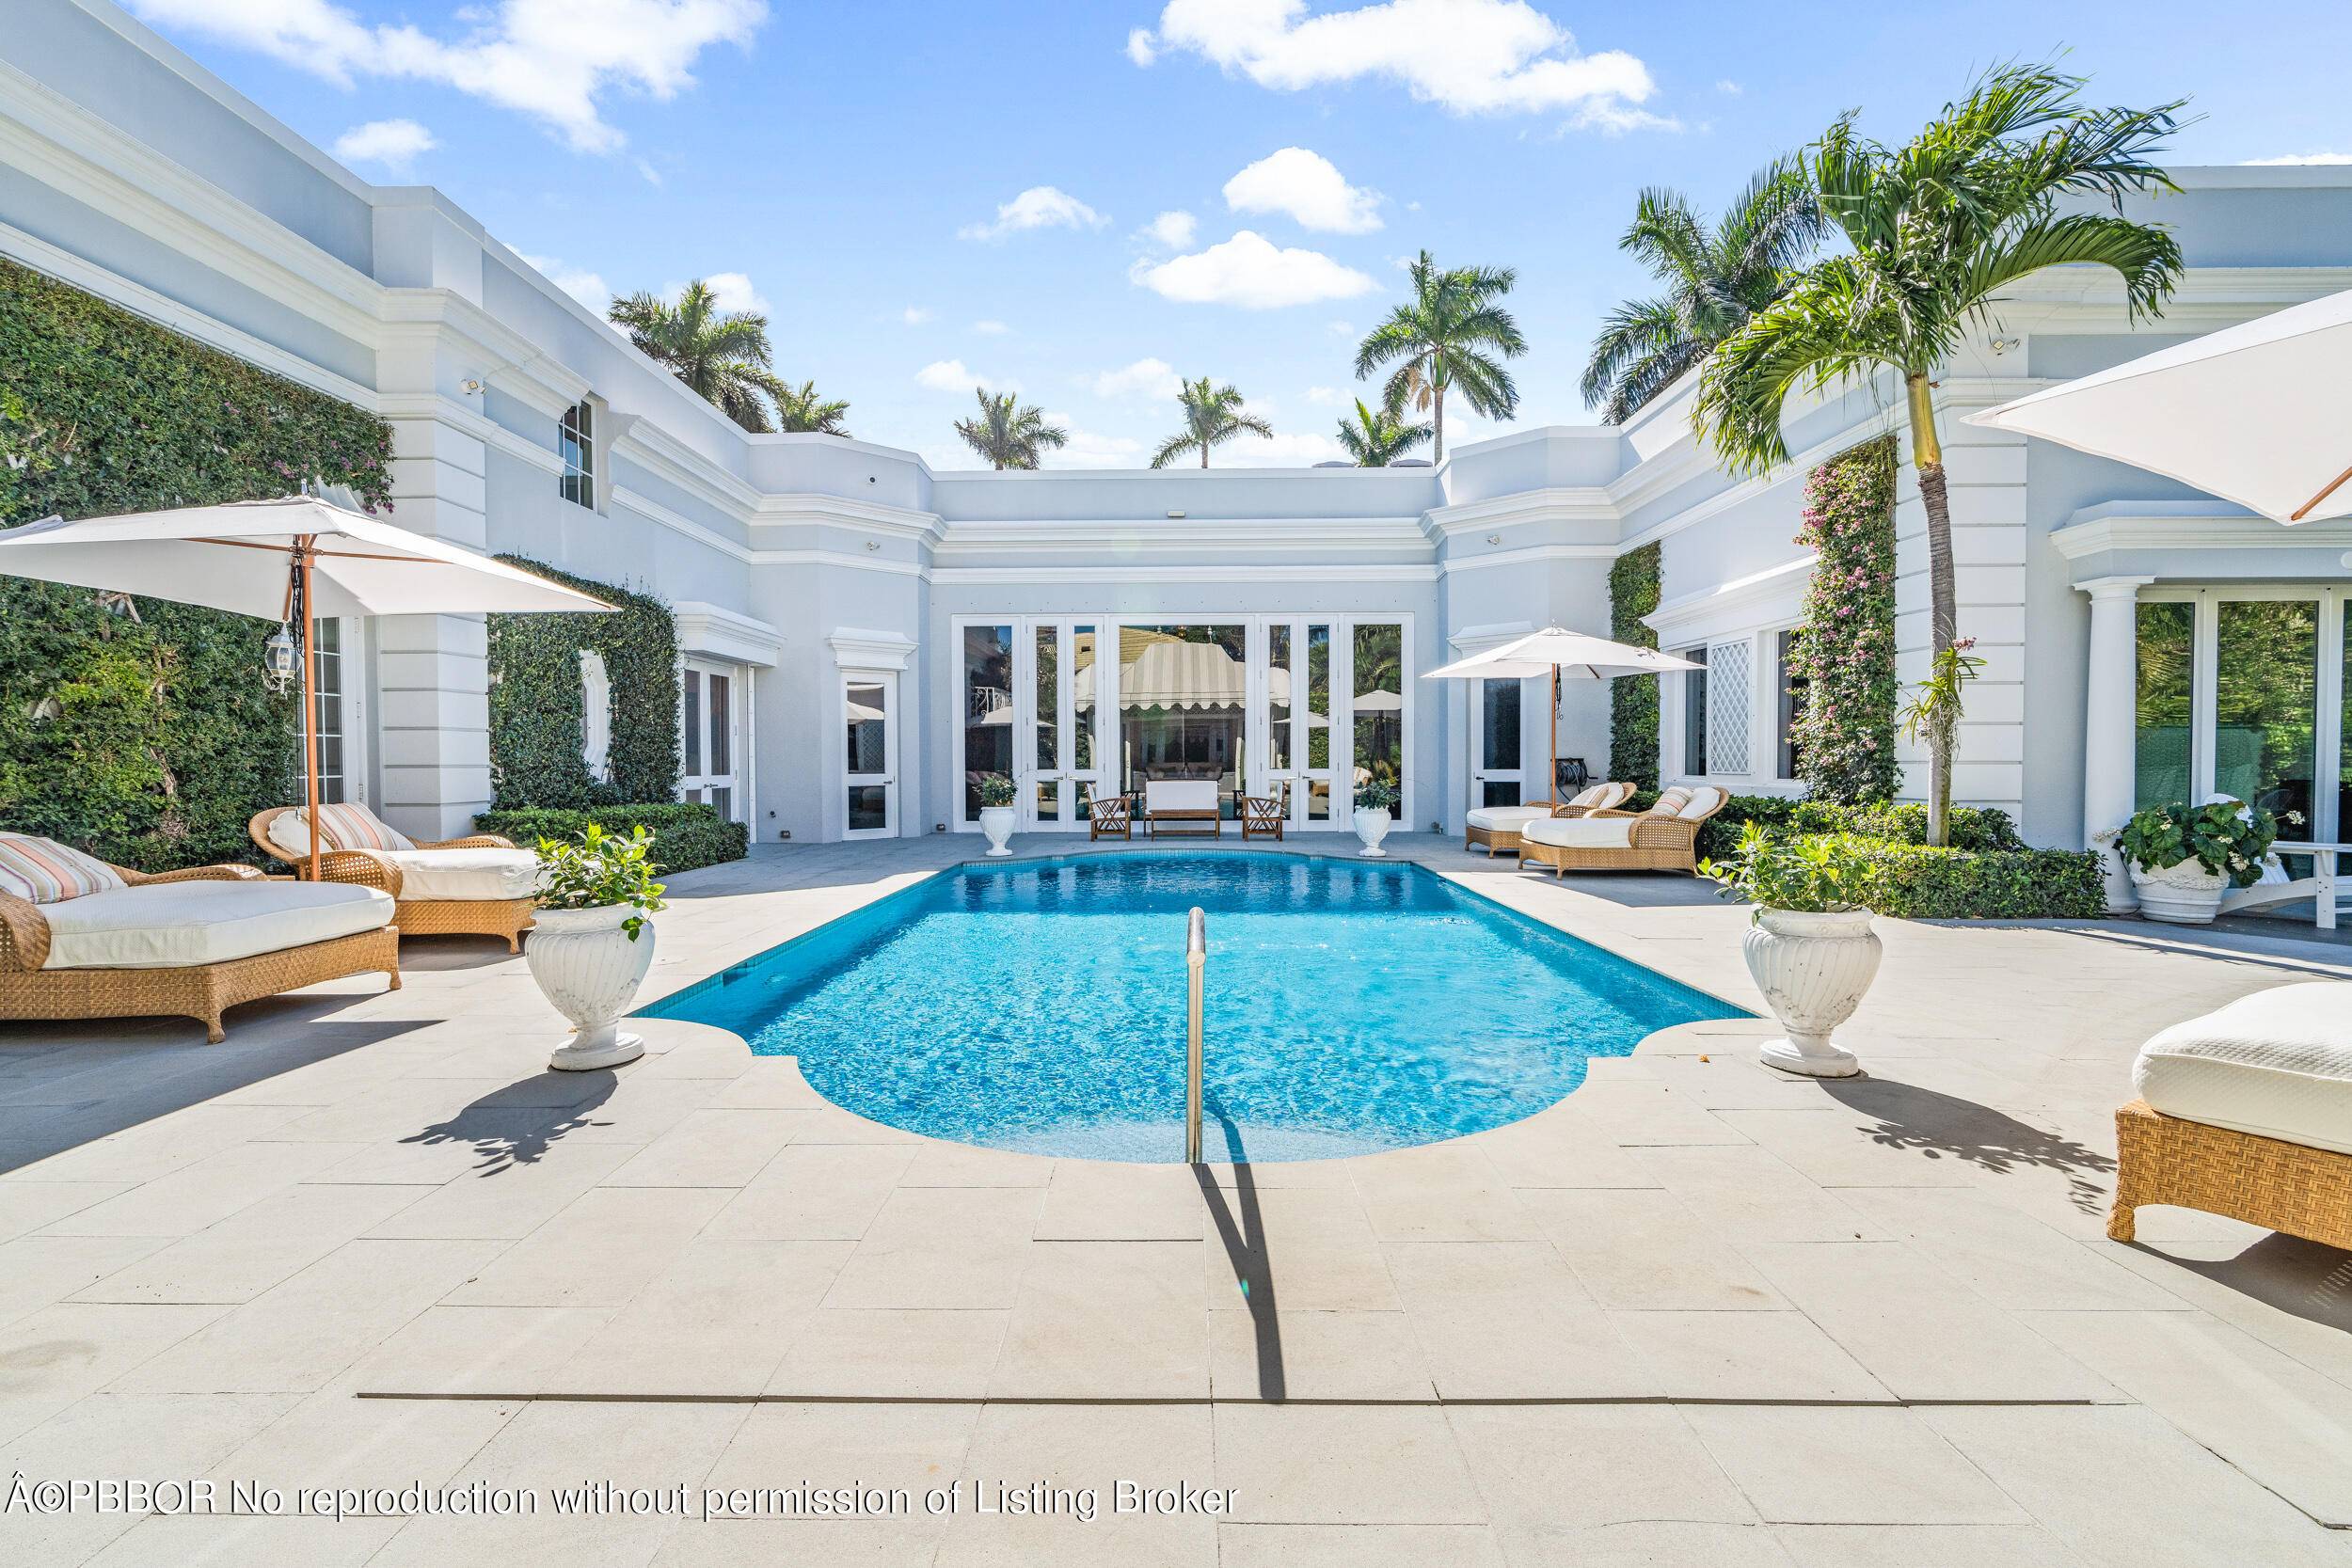 Regally elevated at 16' on over half acre this proper Palm Beach Palladian residence renovated in 2022, showcases quintessential architecture set within beautifully landscaped pool gardens.